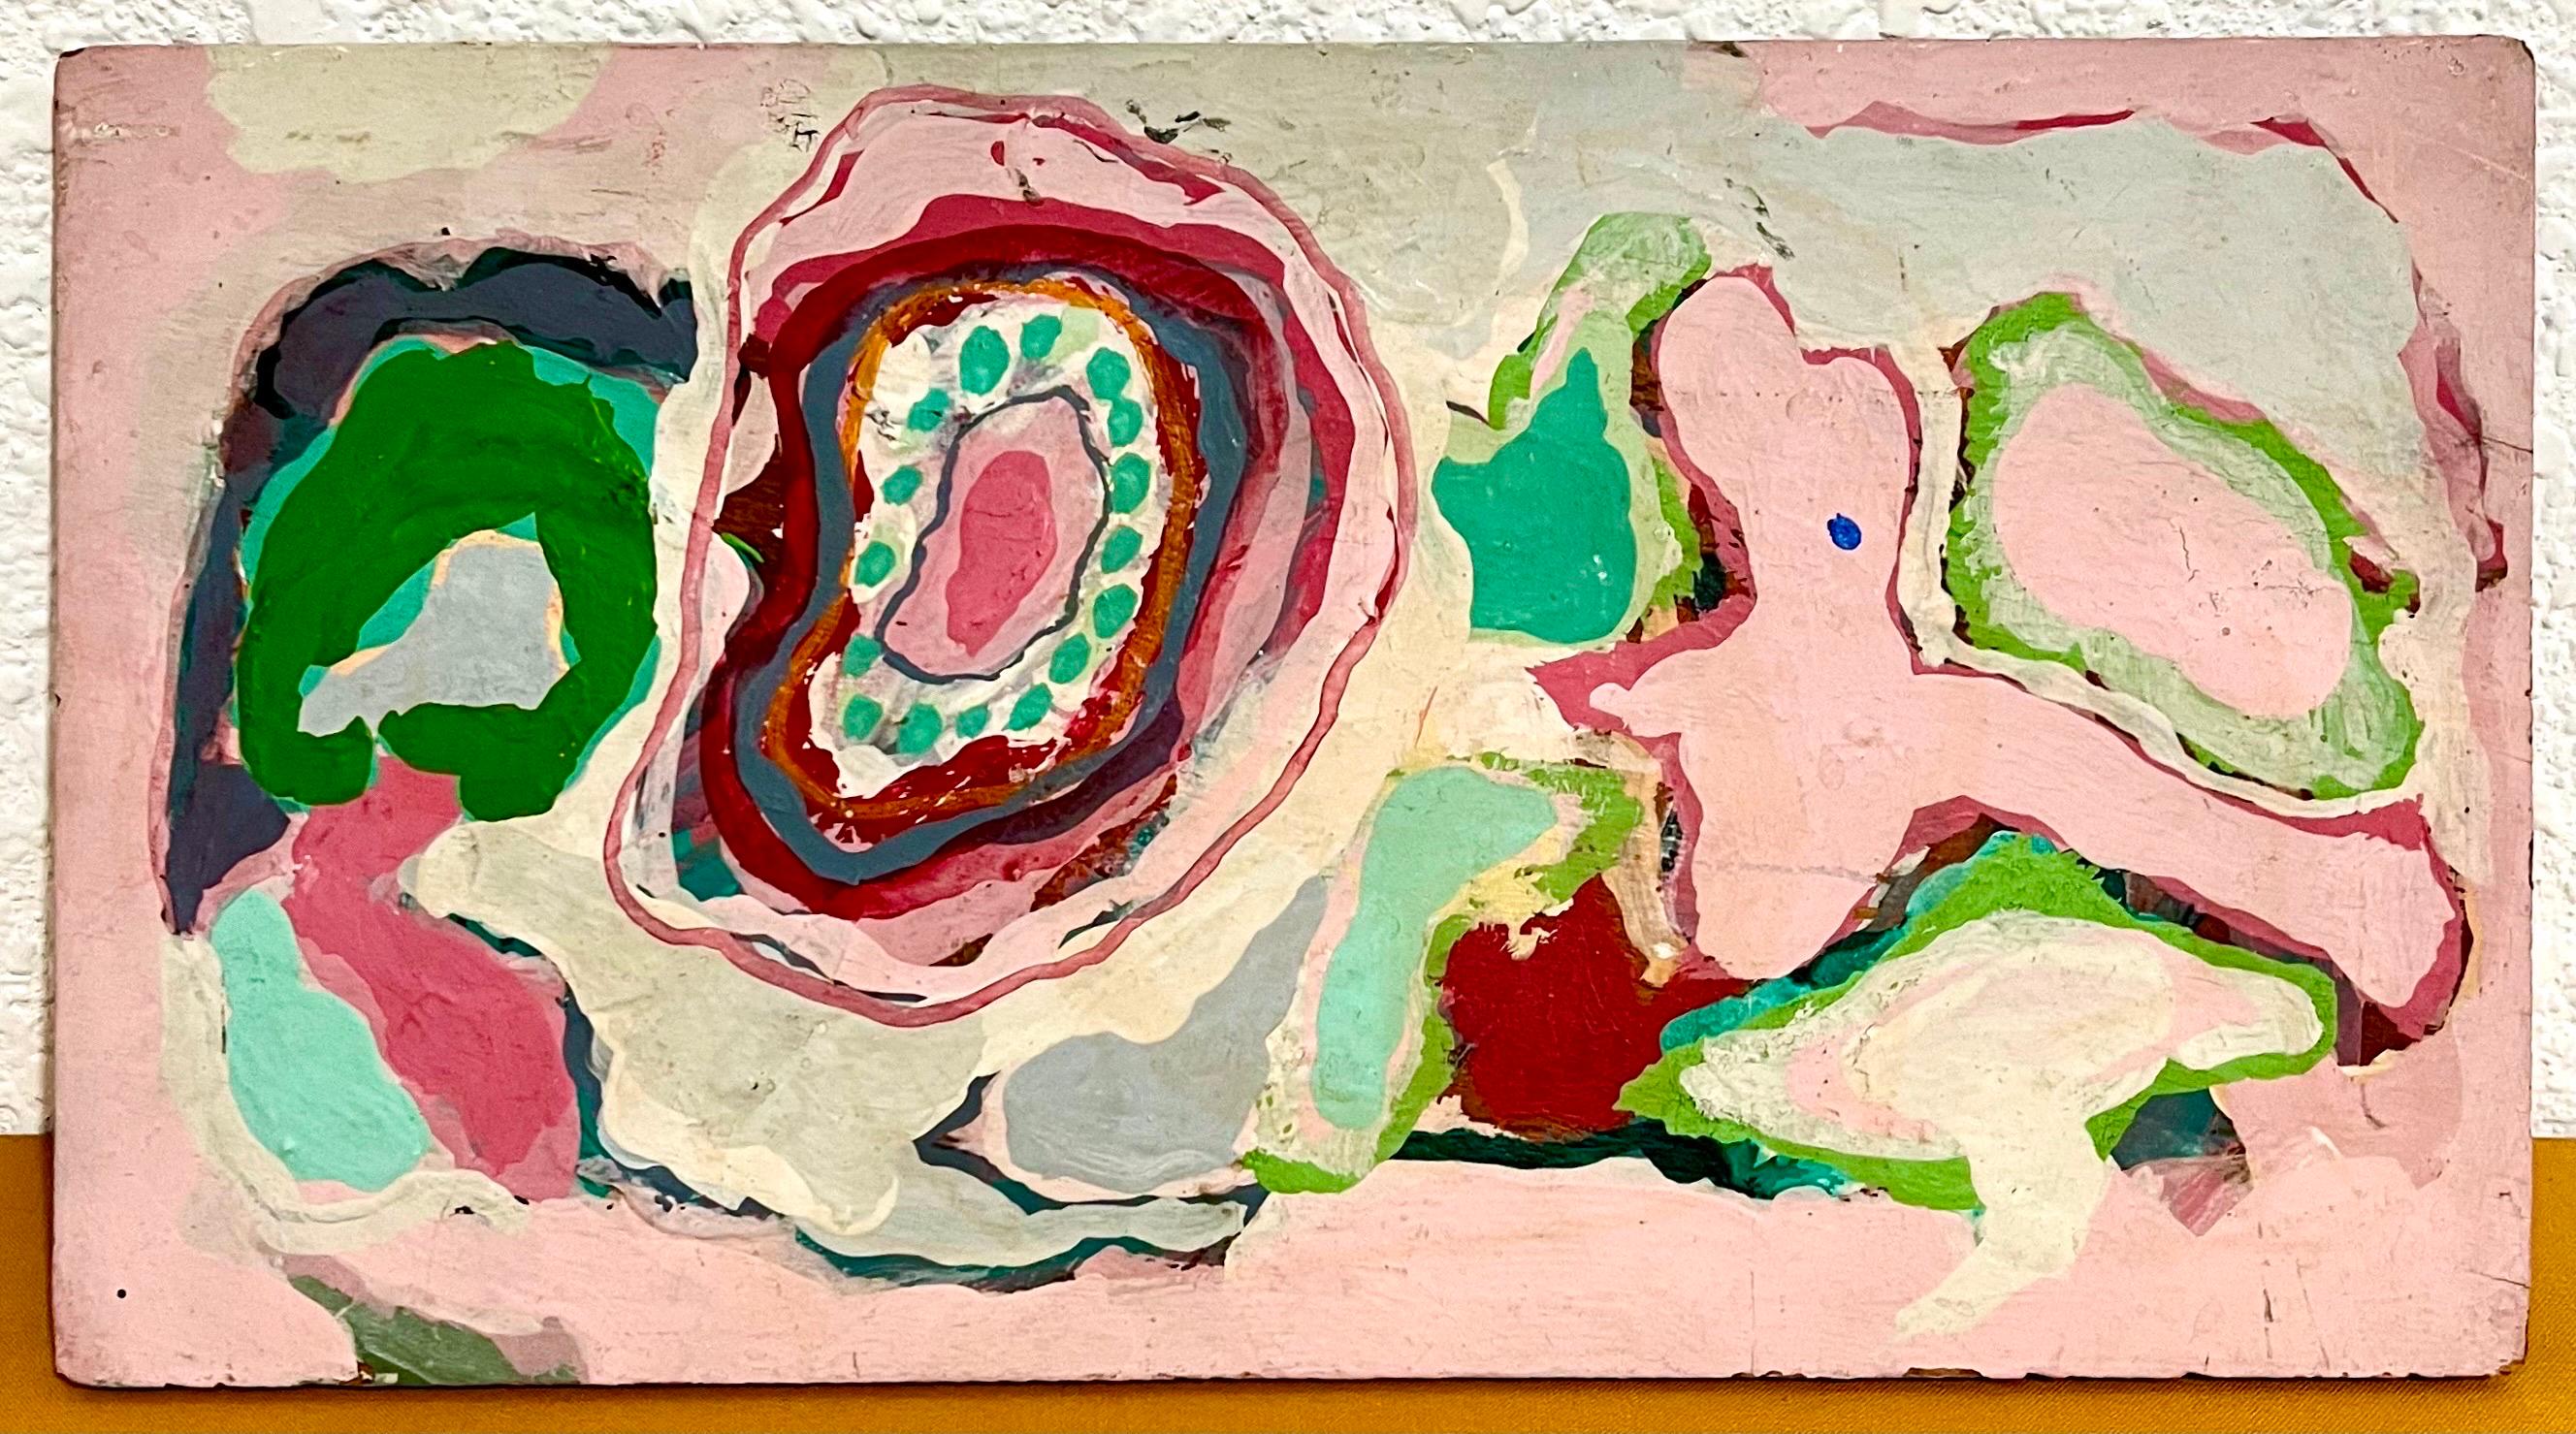 Edward Avedisian ( 1936-2007 ) 
7 X 13
Oil paint on wood panel with pink, red and green abstract.
This is not signed on front. It bears his name verso.
Provenance: Hudson, N.Y. estate of noted Art Collector Albert Burnette Roberts